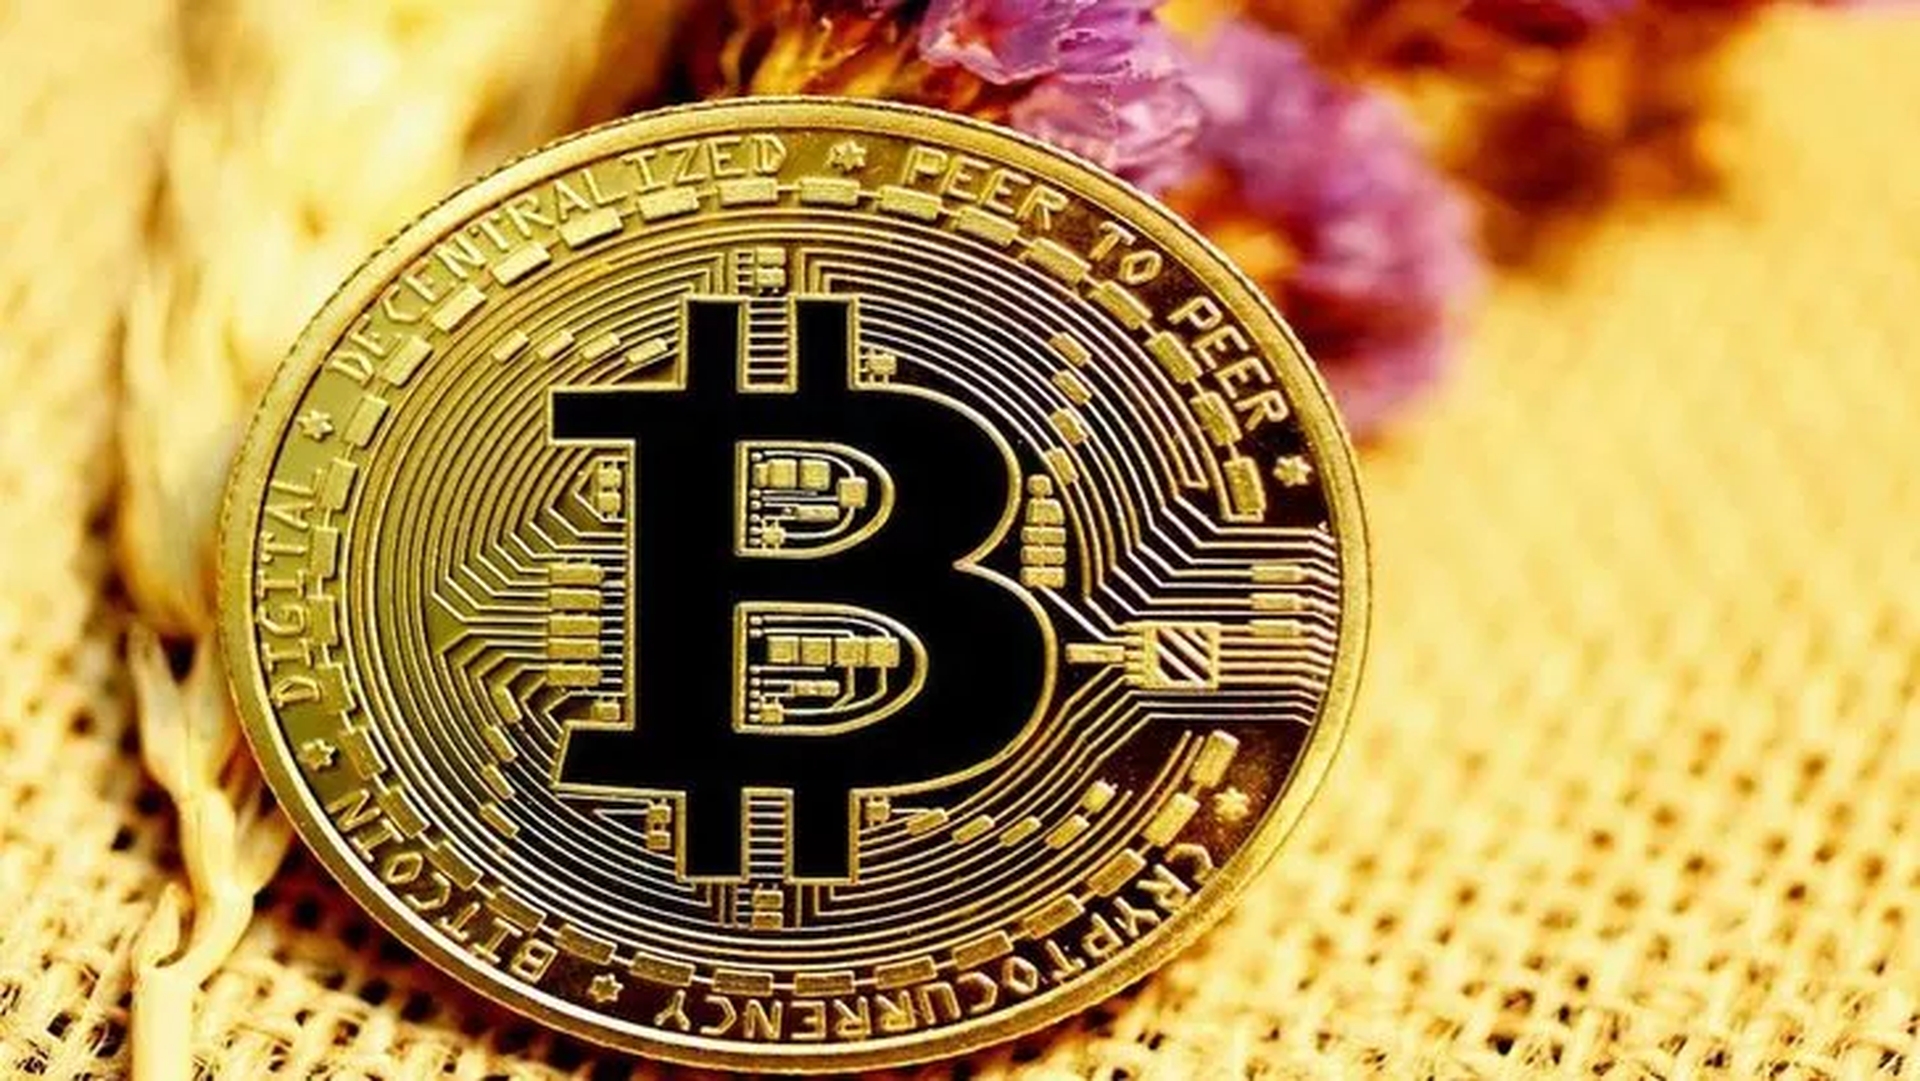 In this article, we are going to cover how to buy Bitcoin with Yandex Money, so you can utilize this service while making your next Bitcoin purchase.